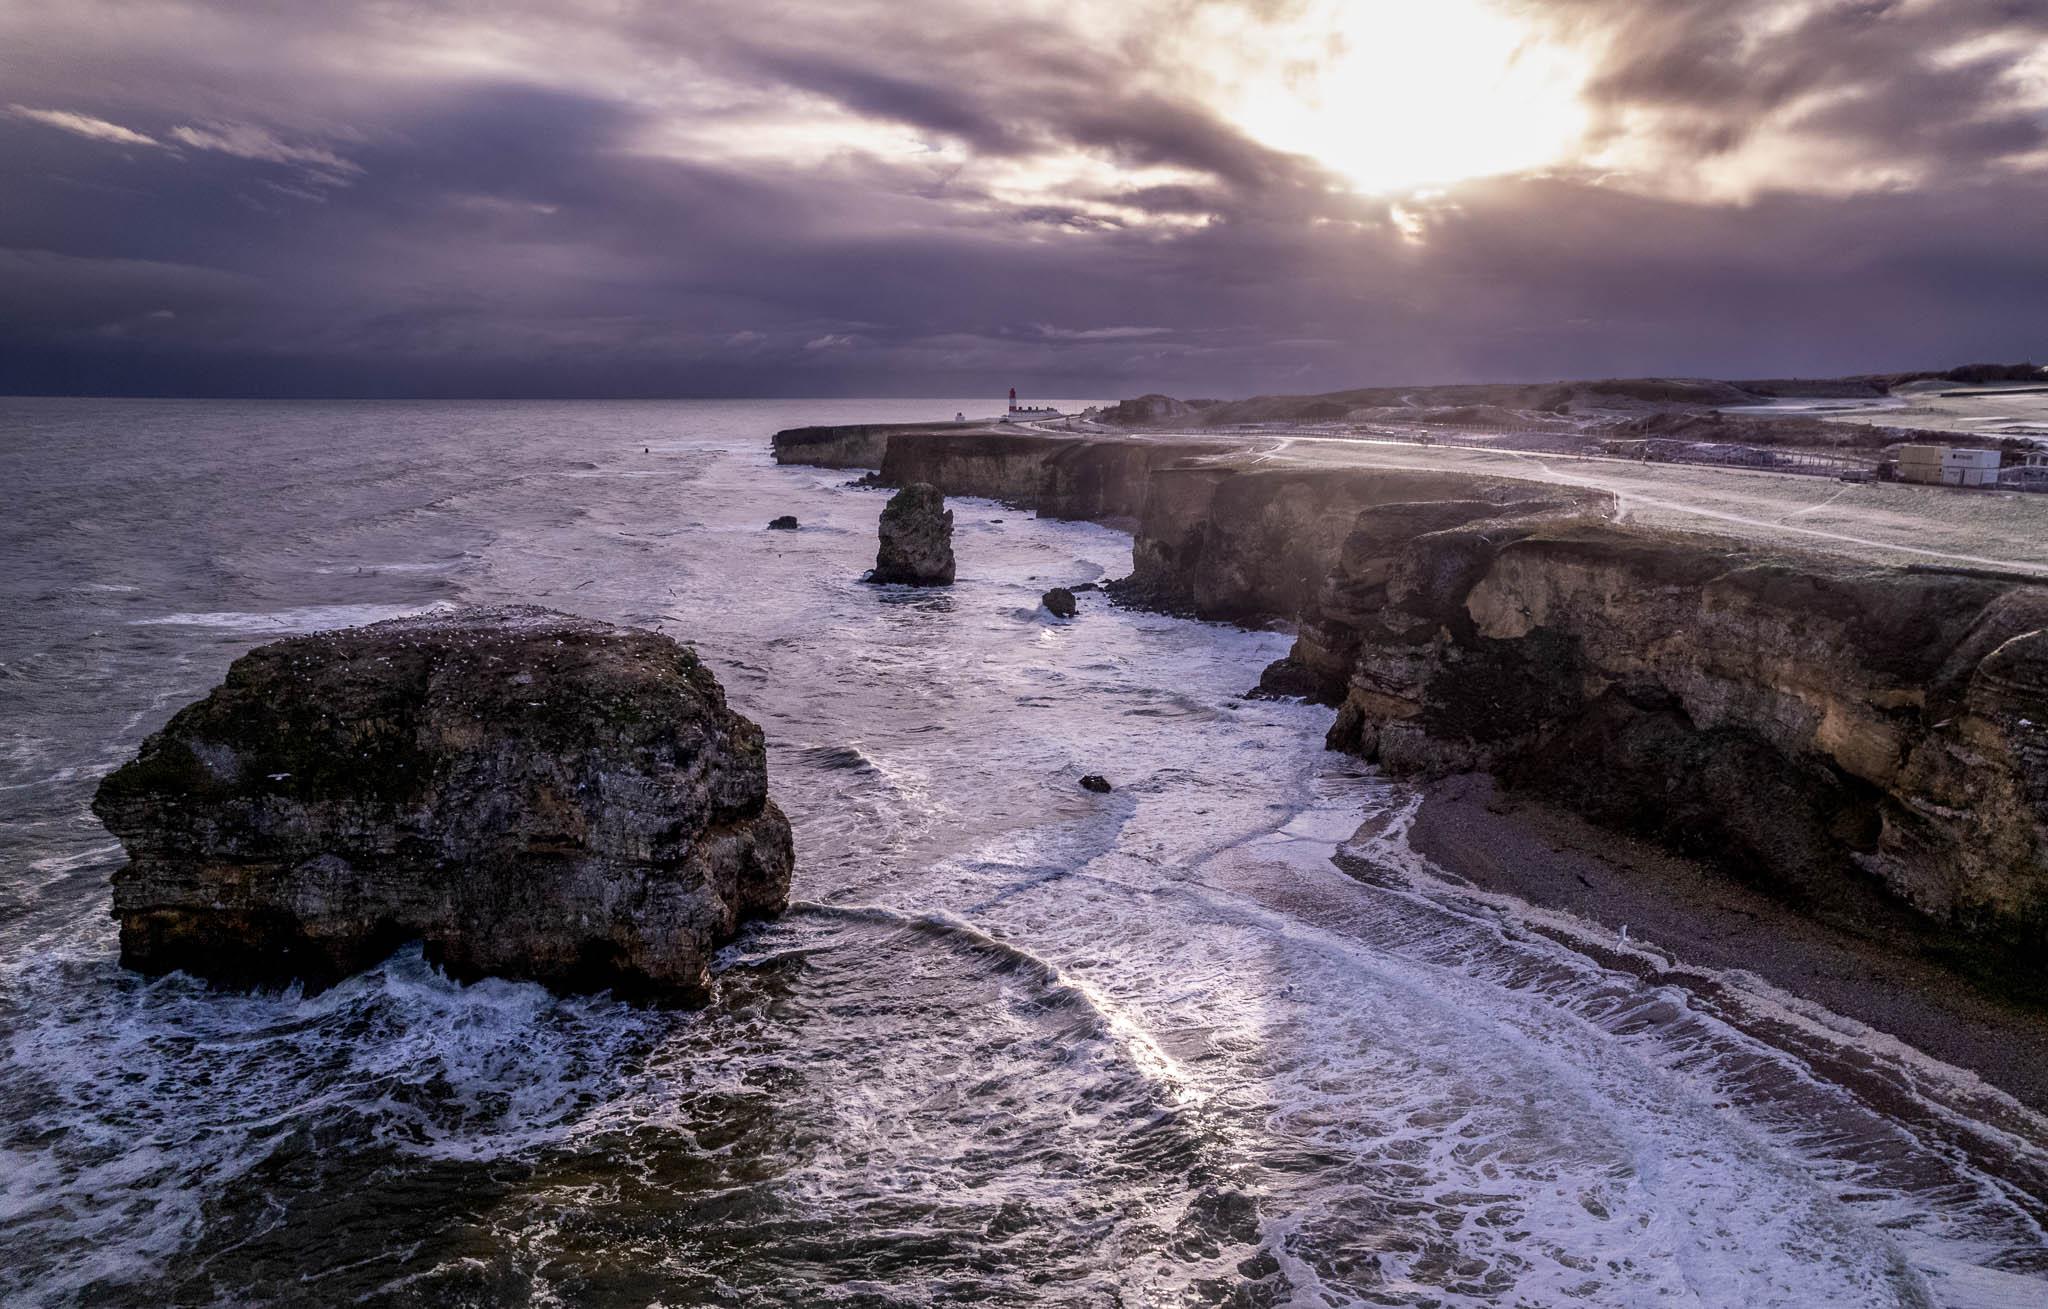 Drone shot of Marsden Rock in North East England taken on a winter morning 